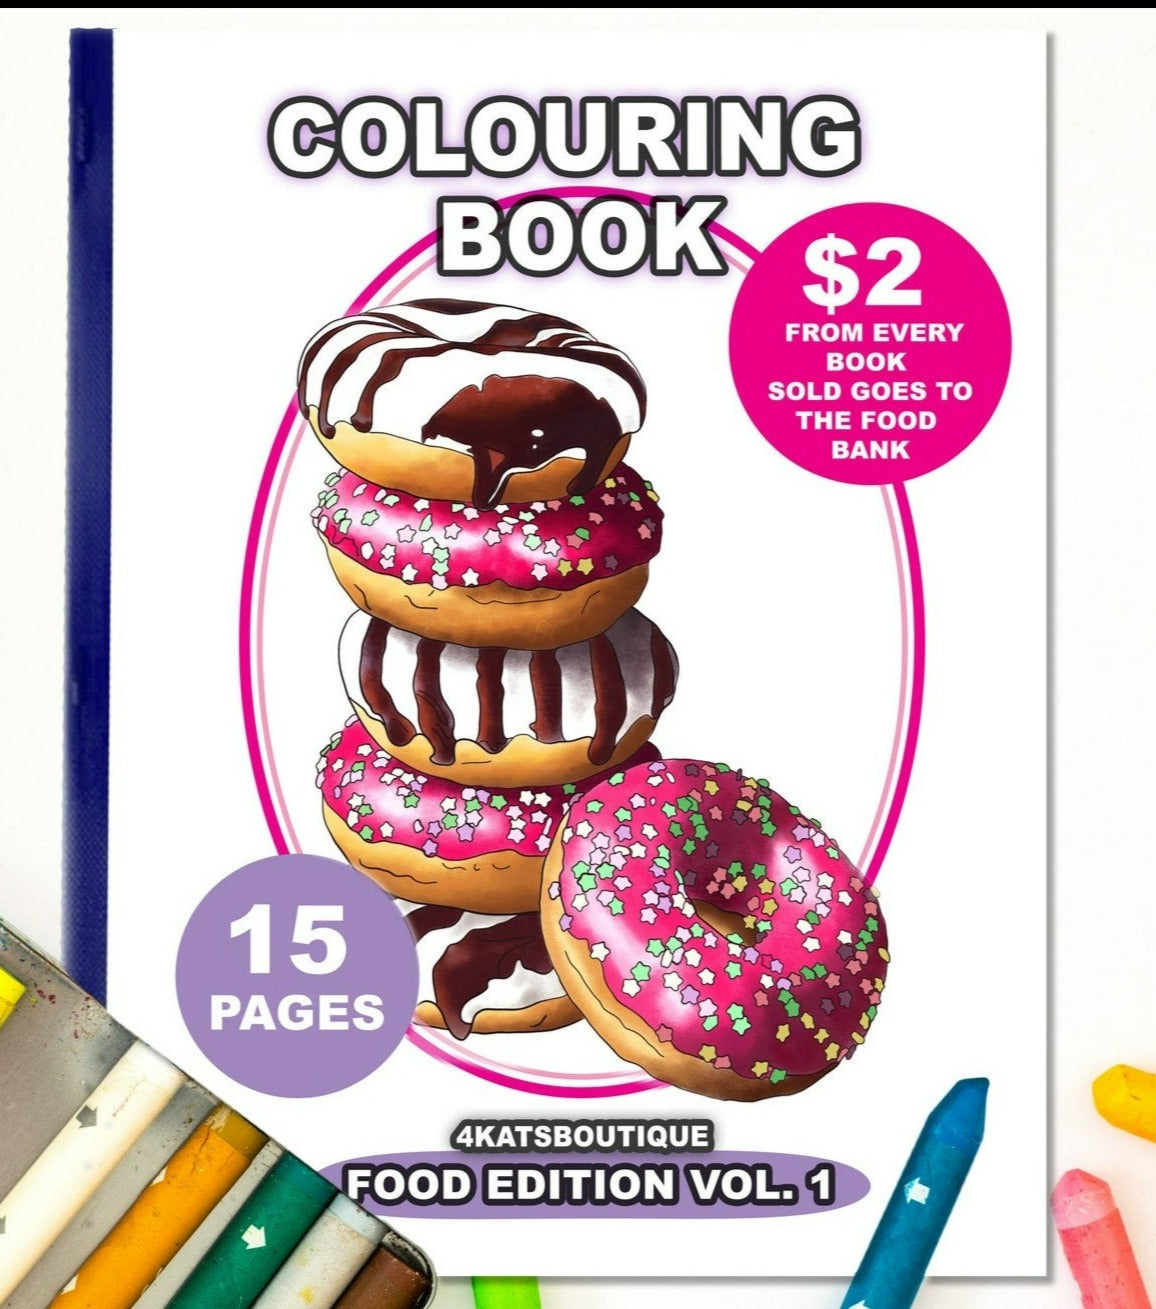 Food Edition Vol. 1 - The Colouring Book that Gives Back